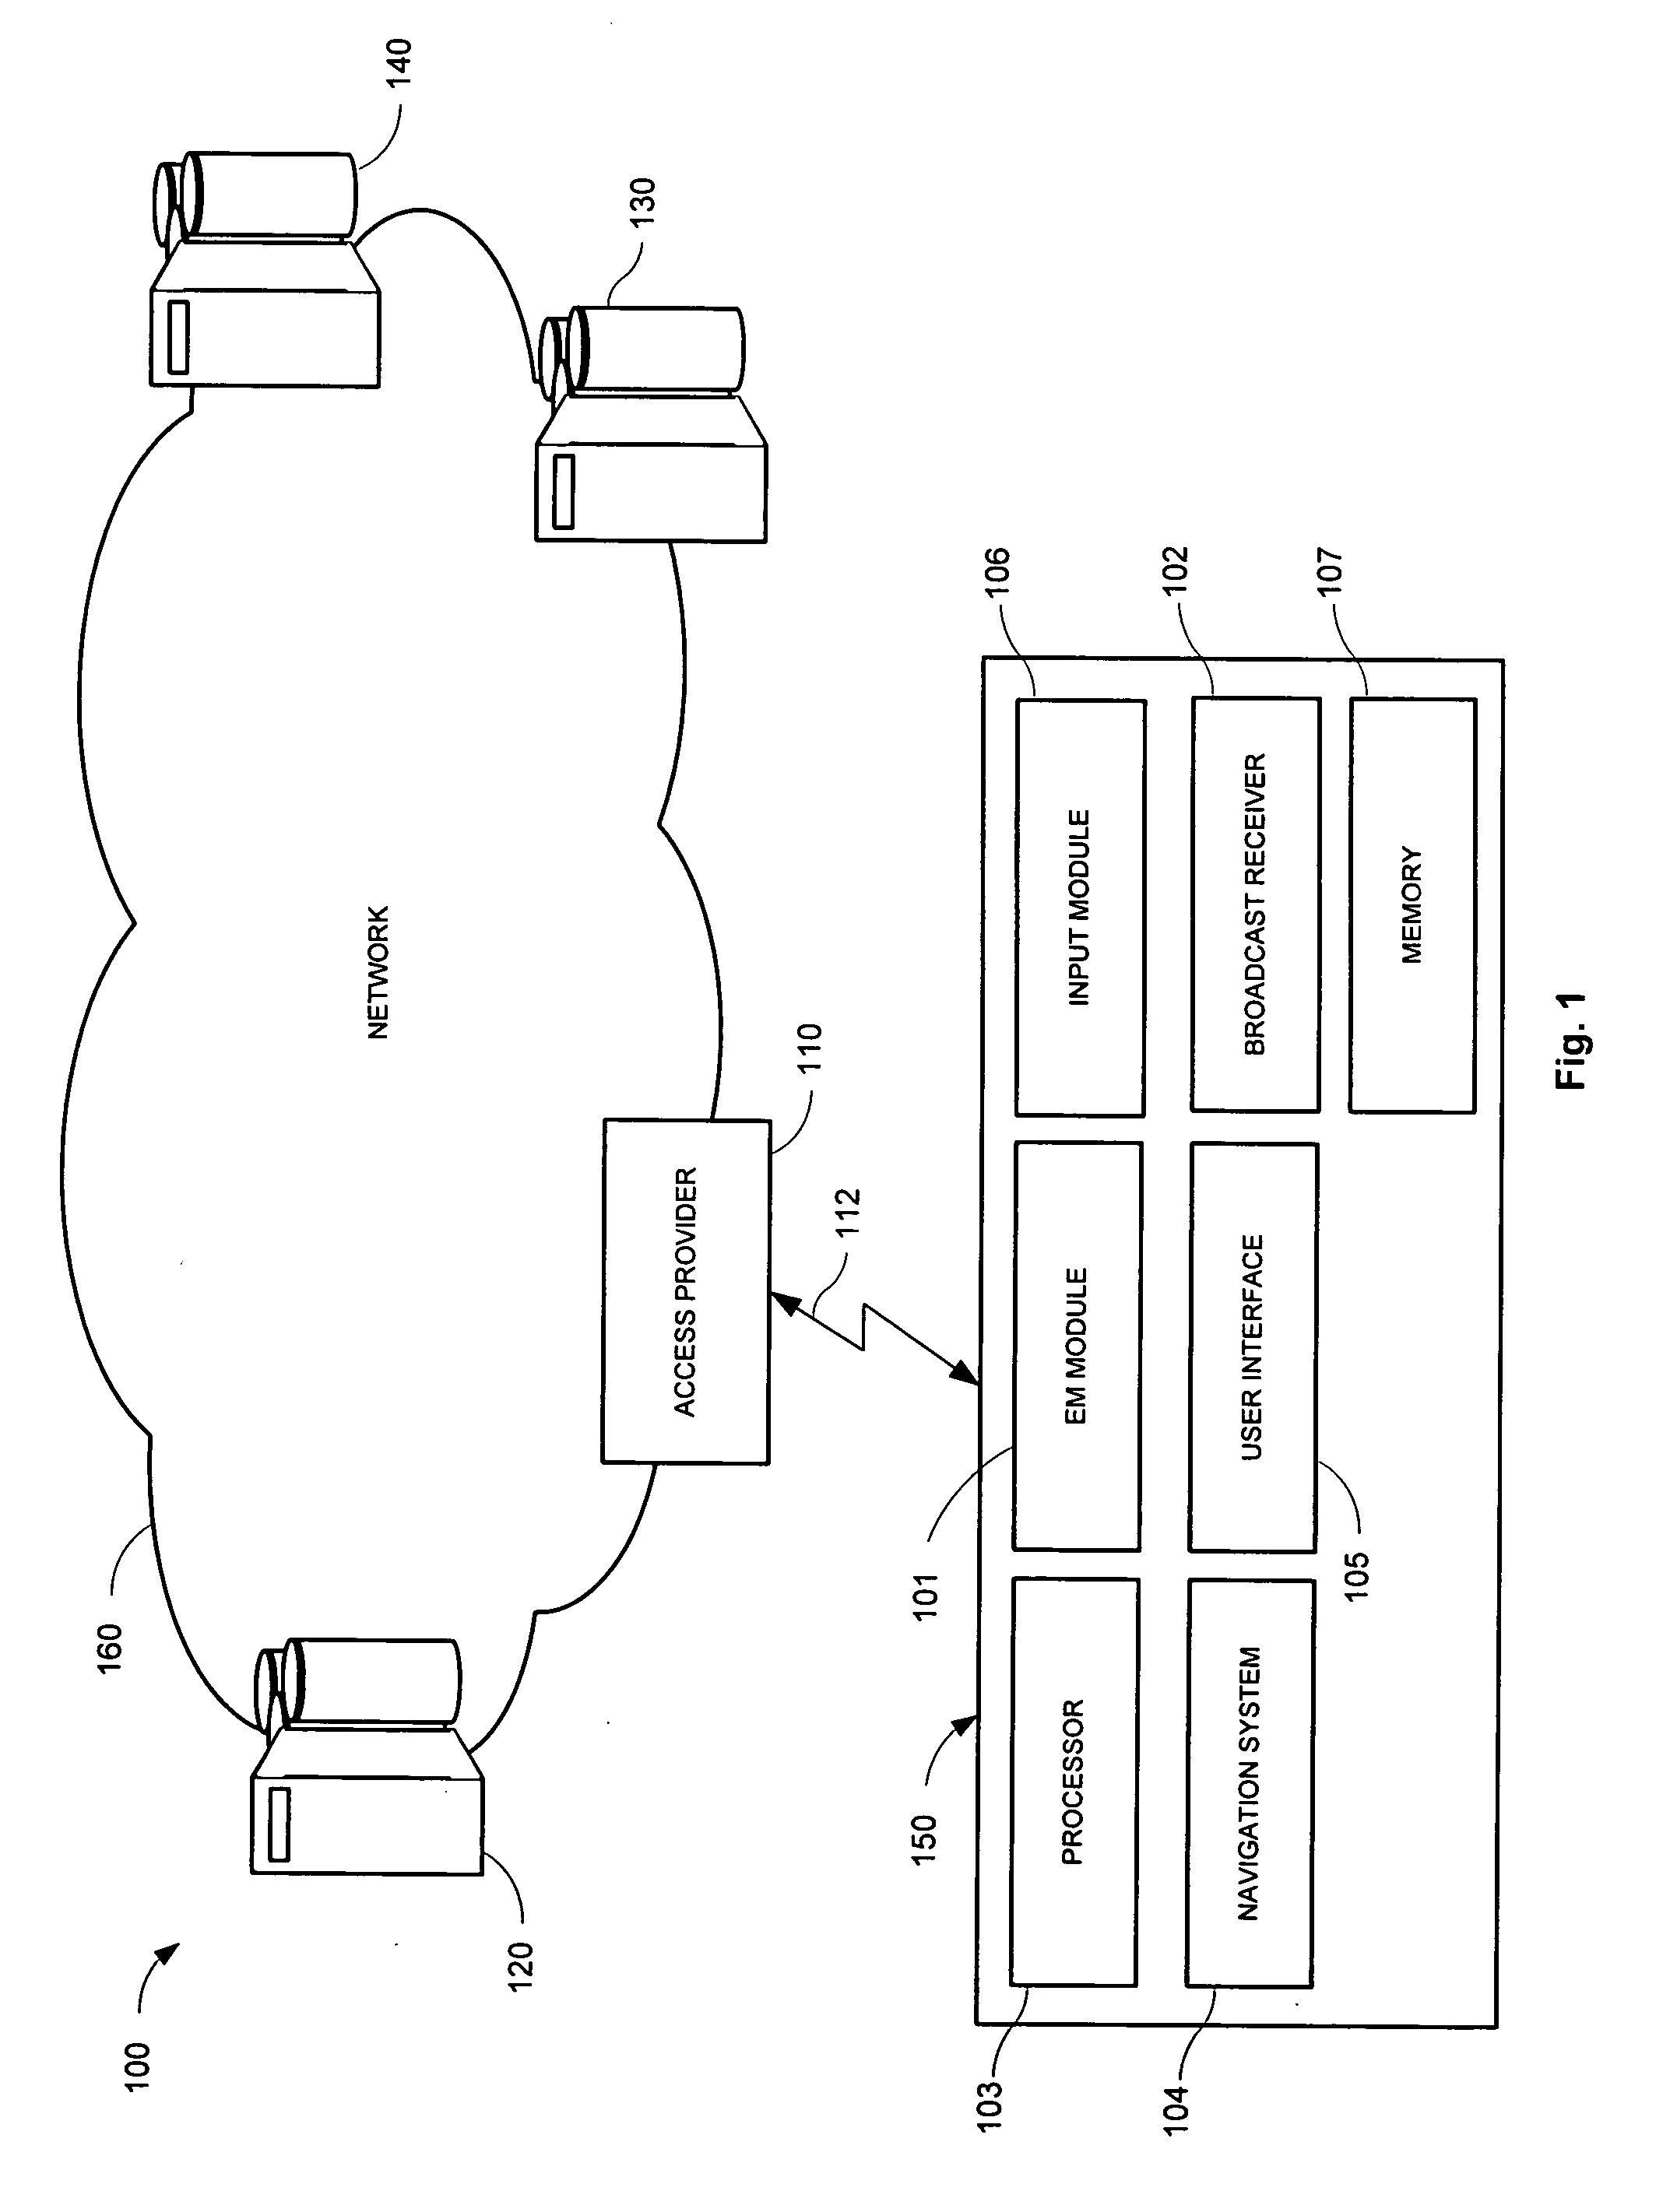 Secure networked system for controlling mobile access to encrypted data services